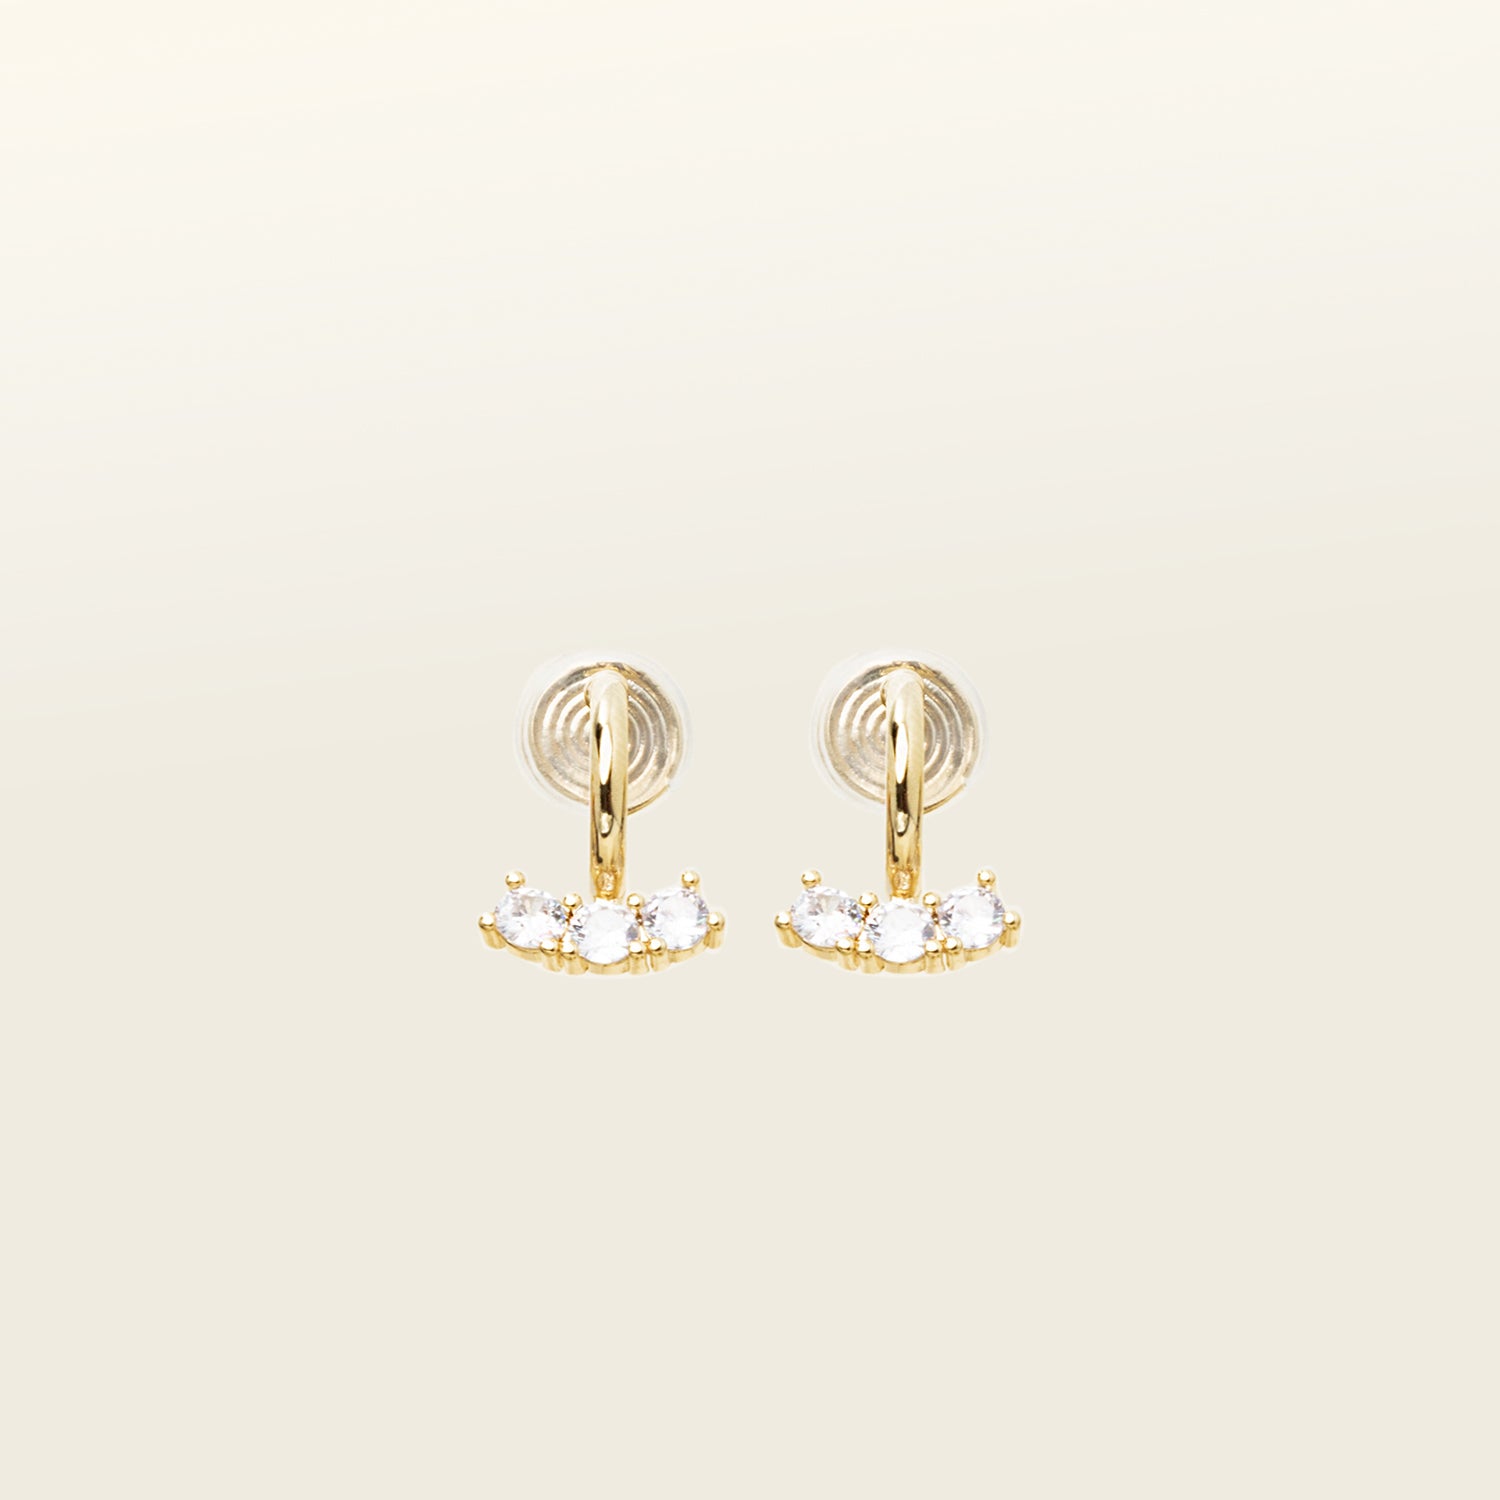 Image of the Juliette Clip-On Earrings offer a medium-strength, secure hold that lasts 24 hours. Easily adjustable with a gentle squeeze, these Mosquito Coil Clip-Ons are ideal for thick/large ears as well as sensitive ears. Crafted with gold-tone plated metal alloy and cubic zirconia, this item is sold as a single pair.